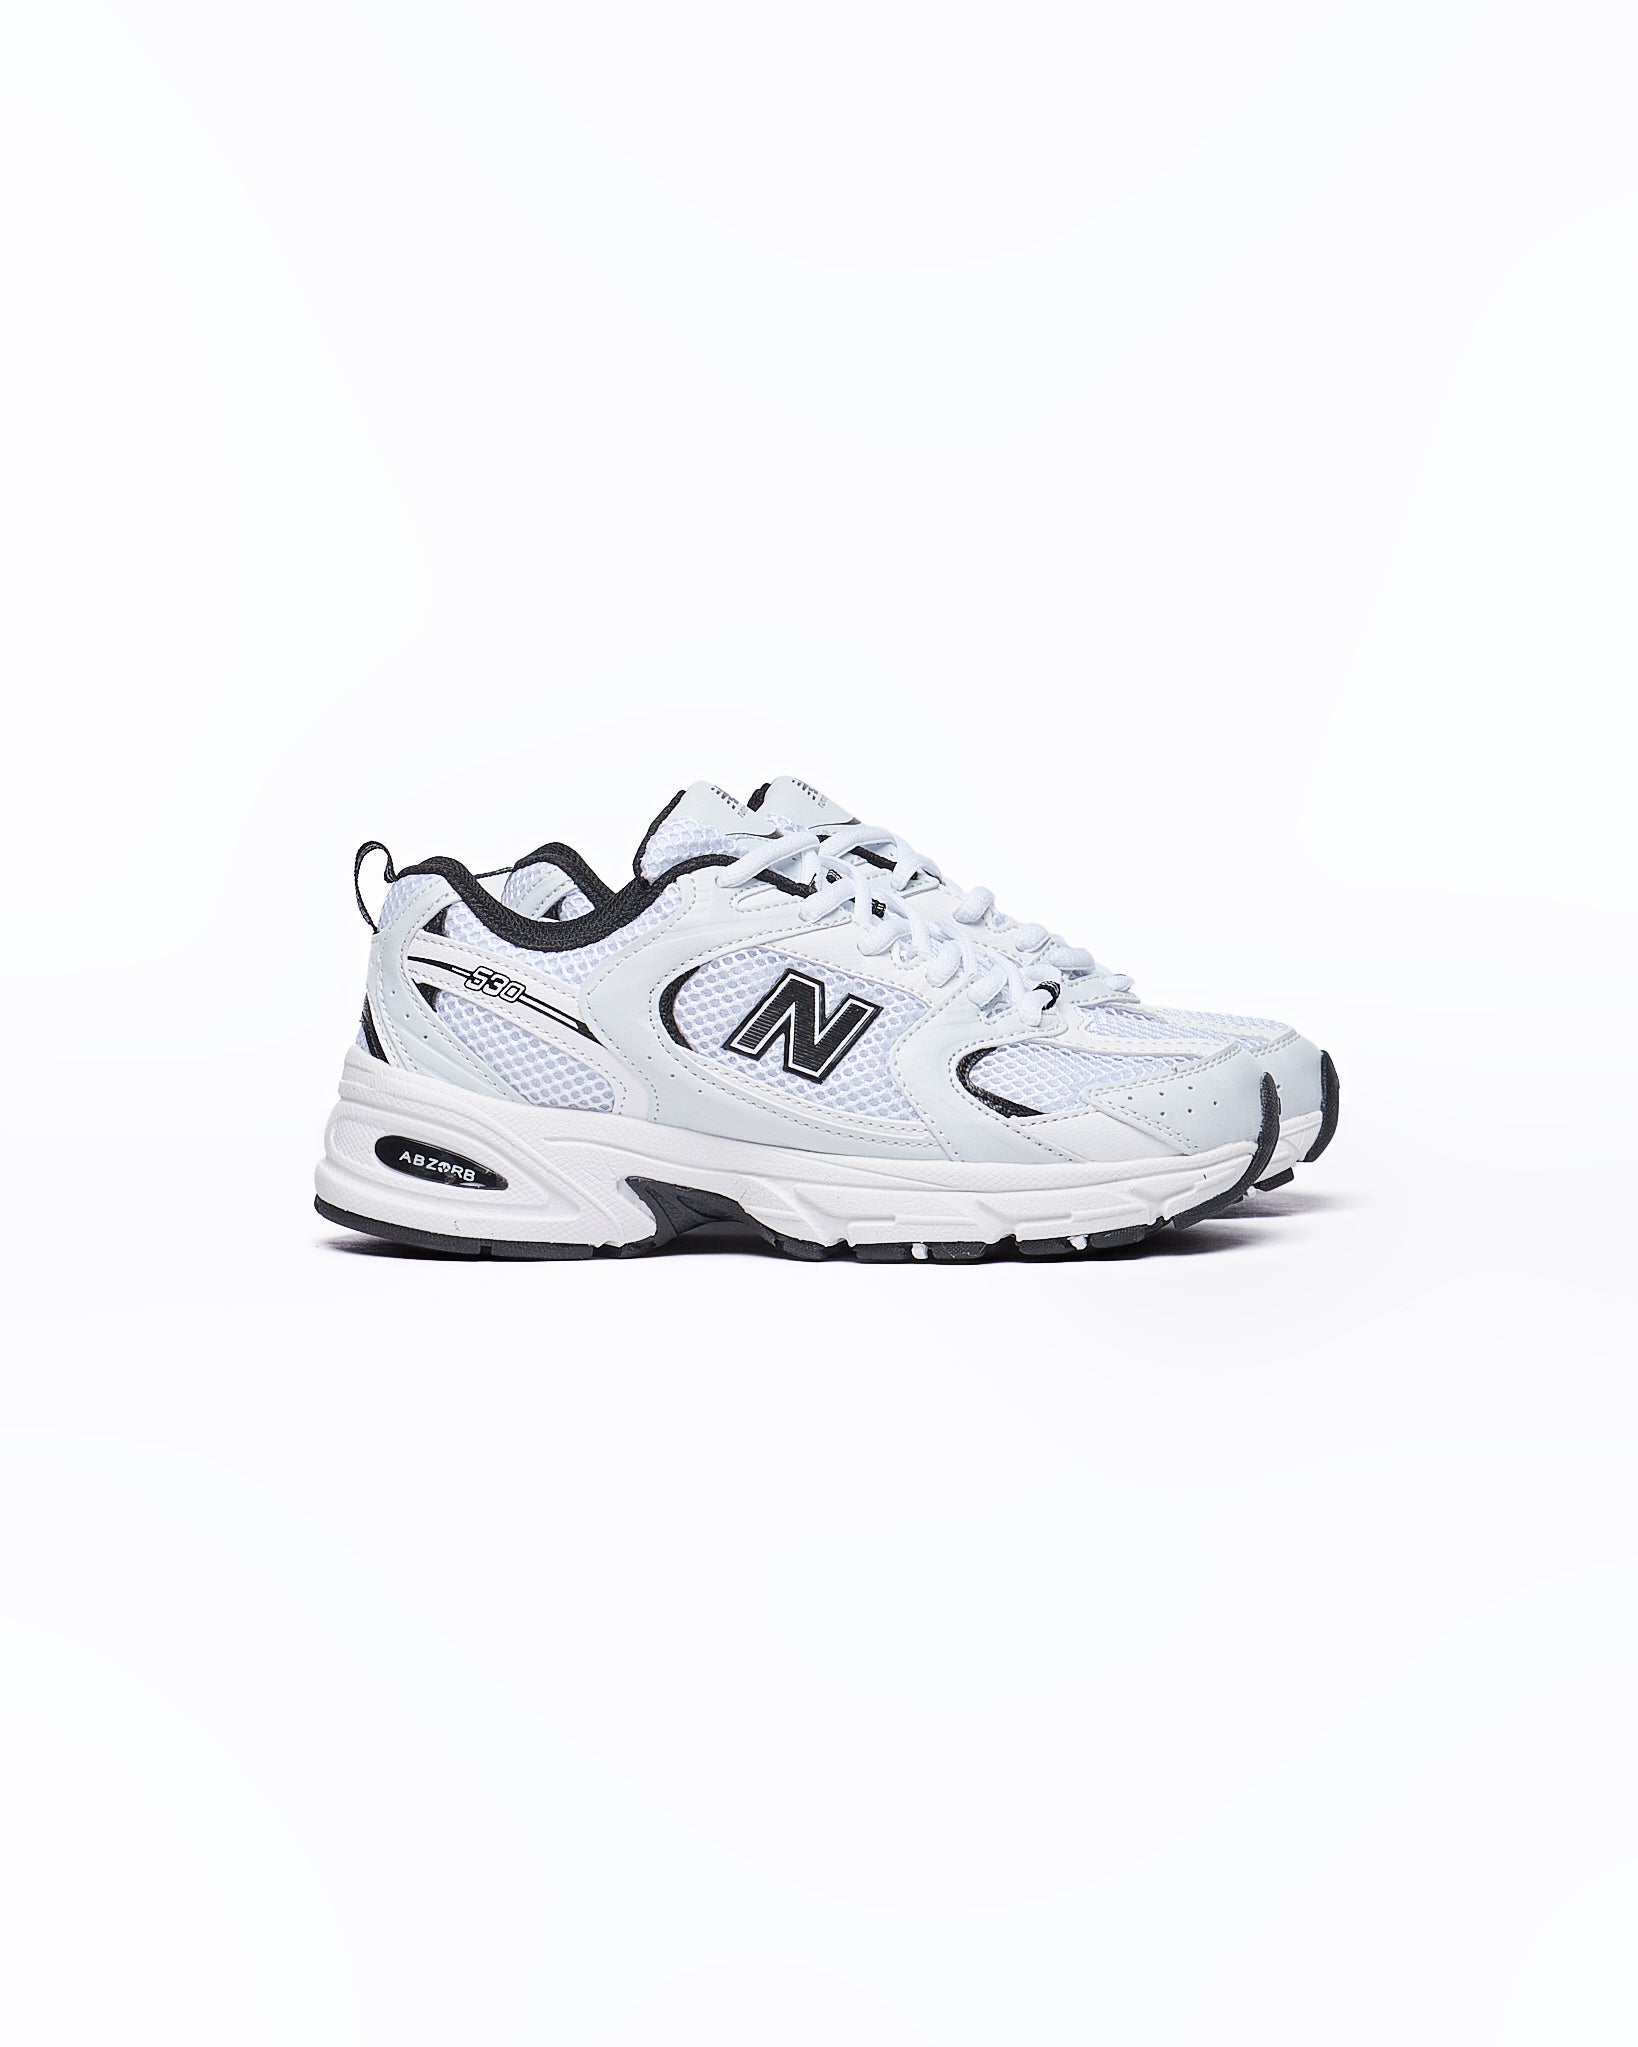 MOI OUTFIT-NB 530 White Black Runners Shoes 69.90